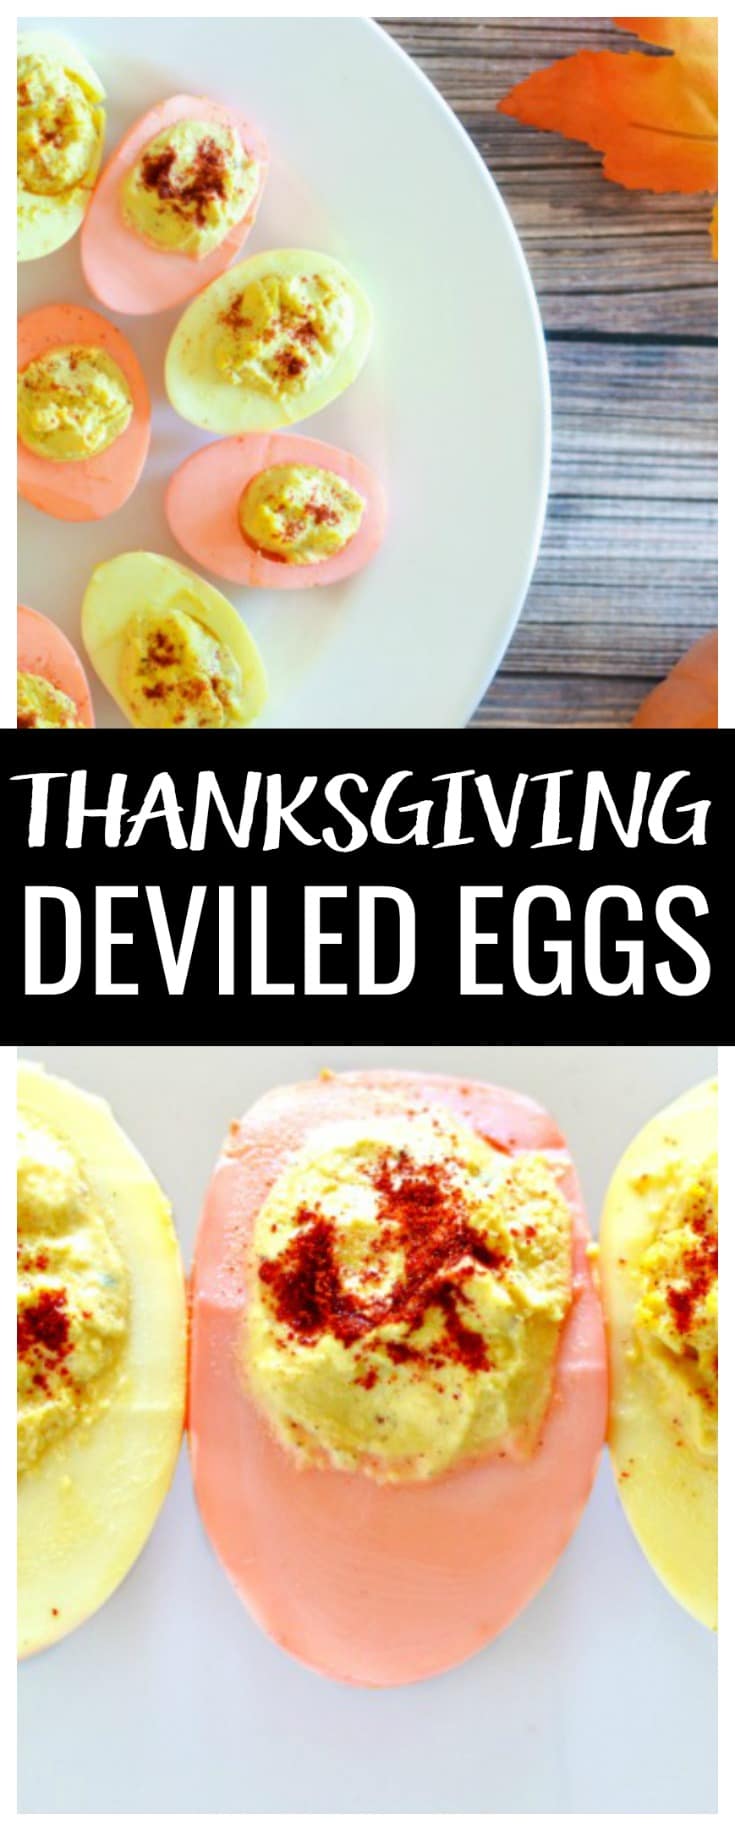 Get festive with your Thanksgiving appetizer this year and try these Colorful Deviled Eggs recipe!